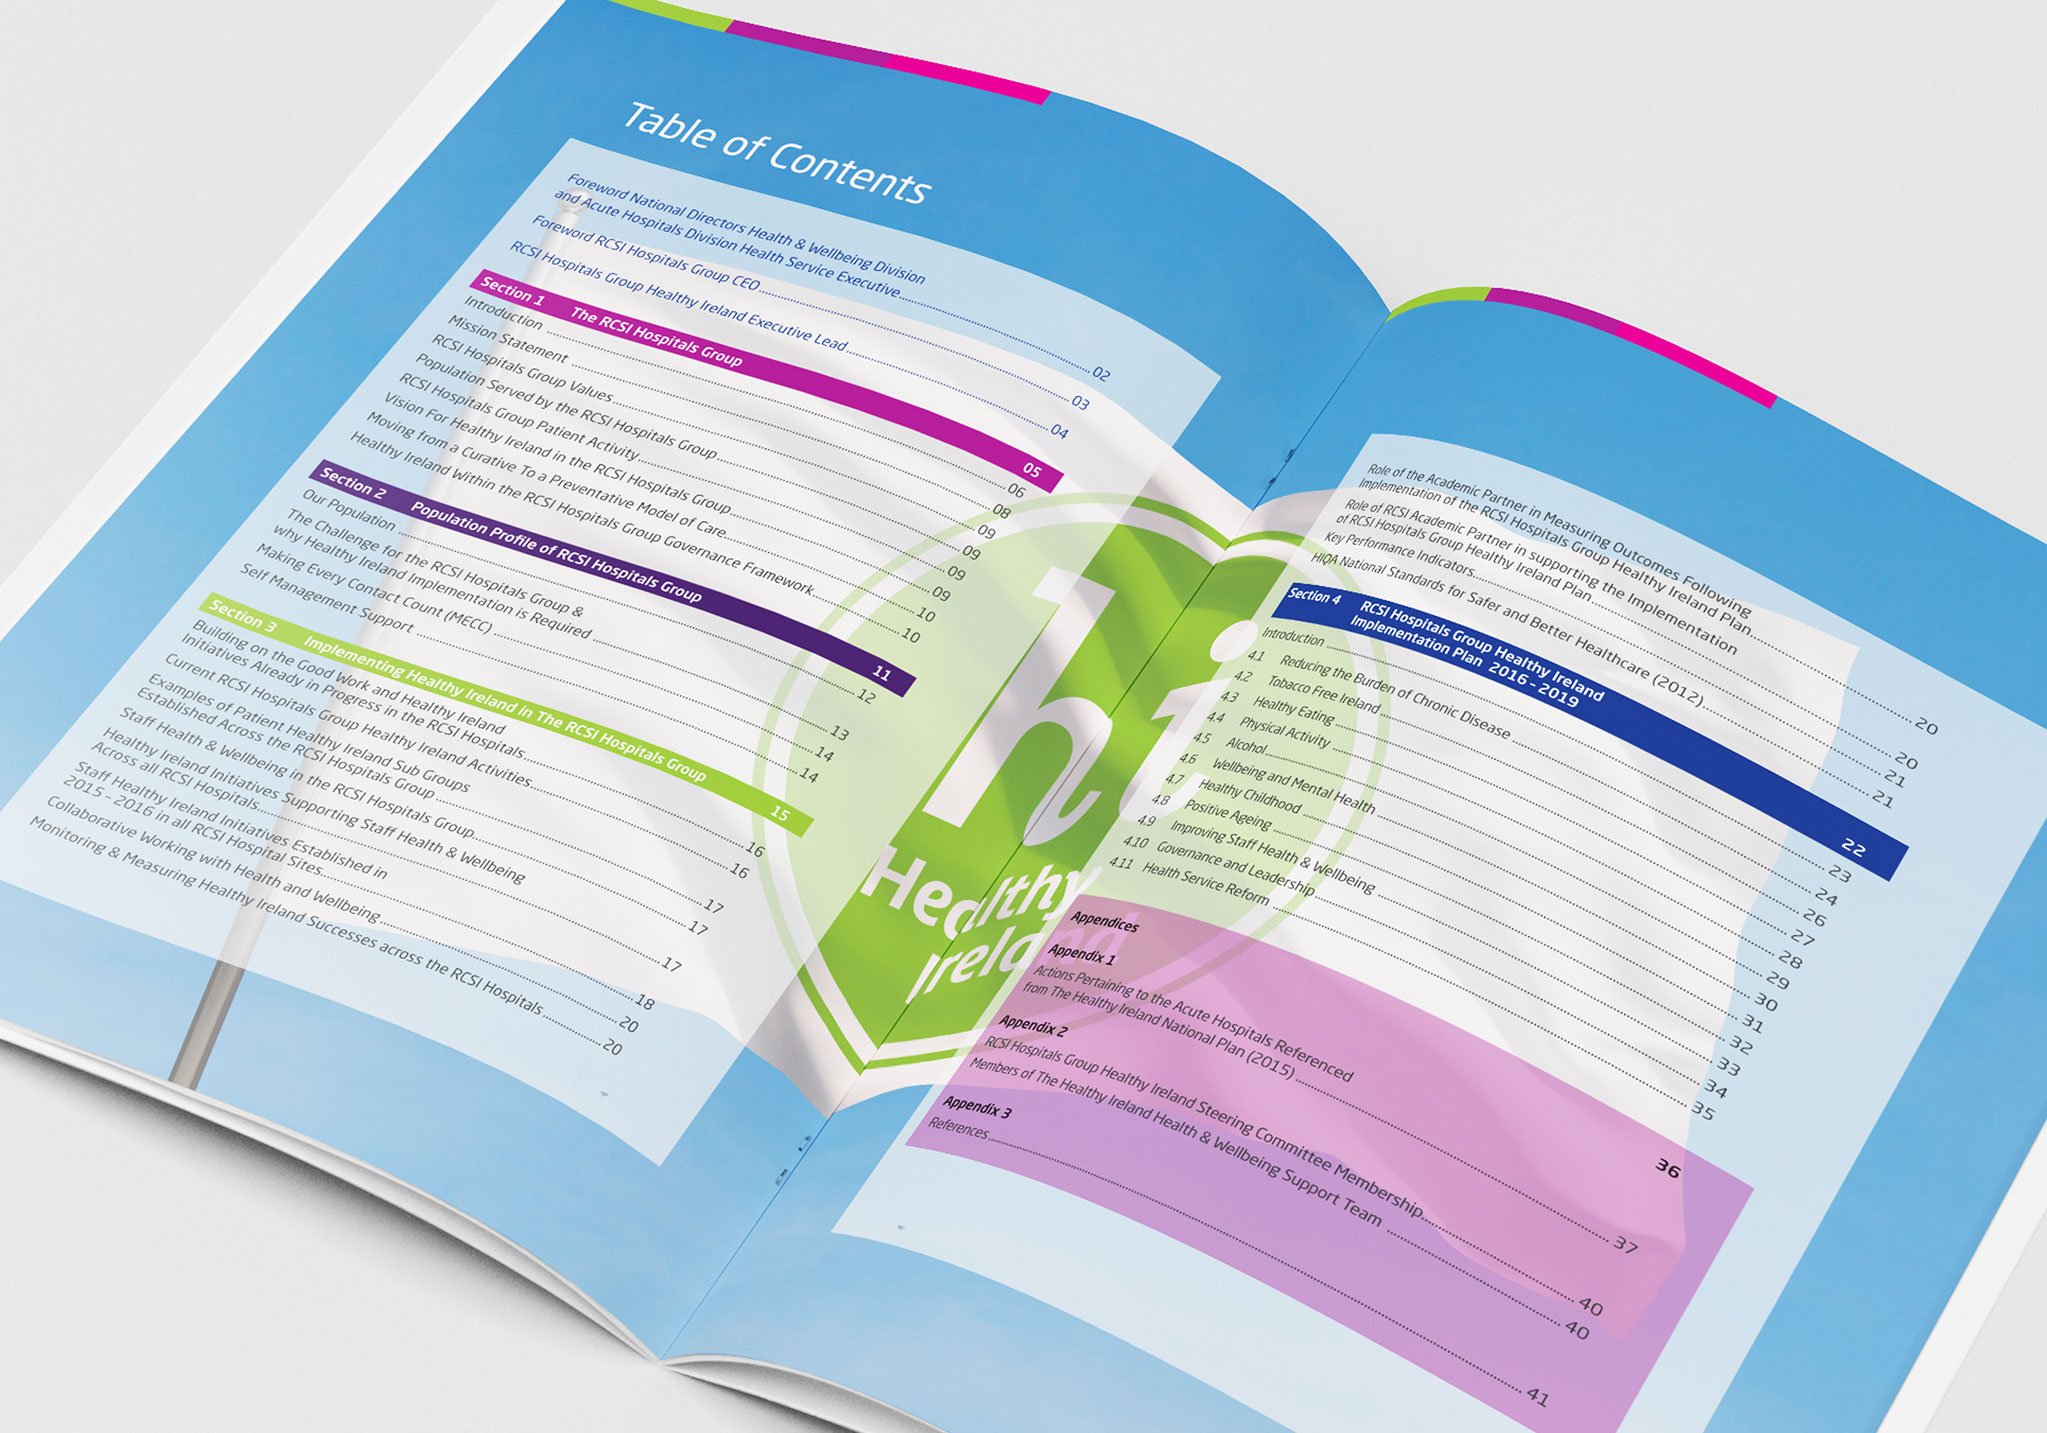 Healthy Ireland contents page design from the implementation plan report